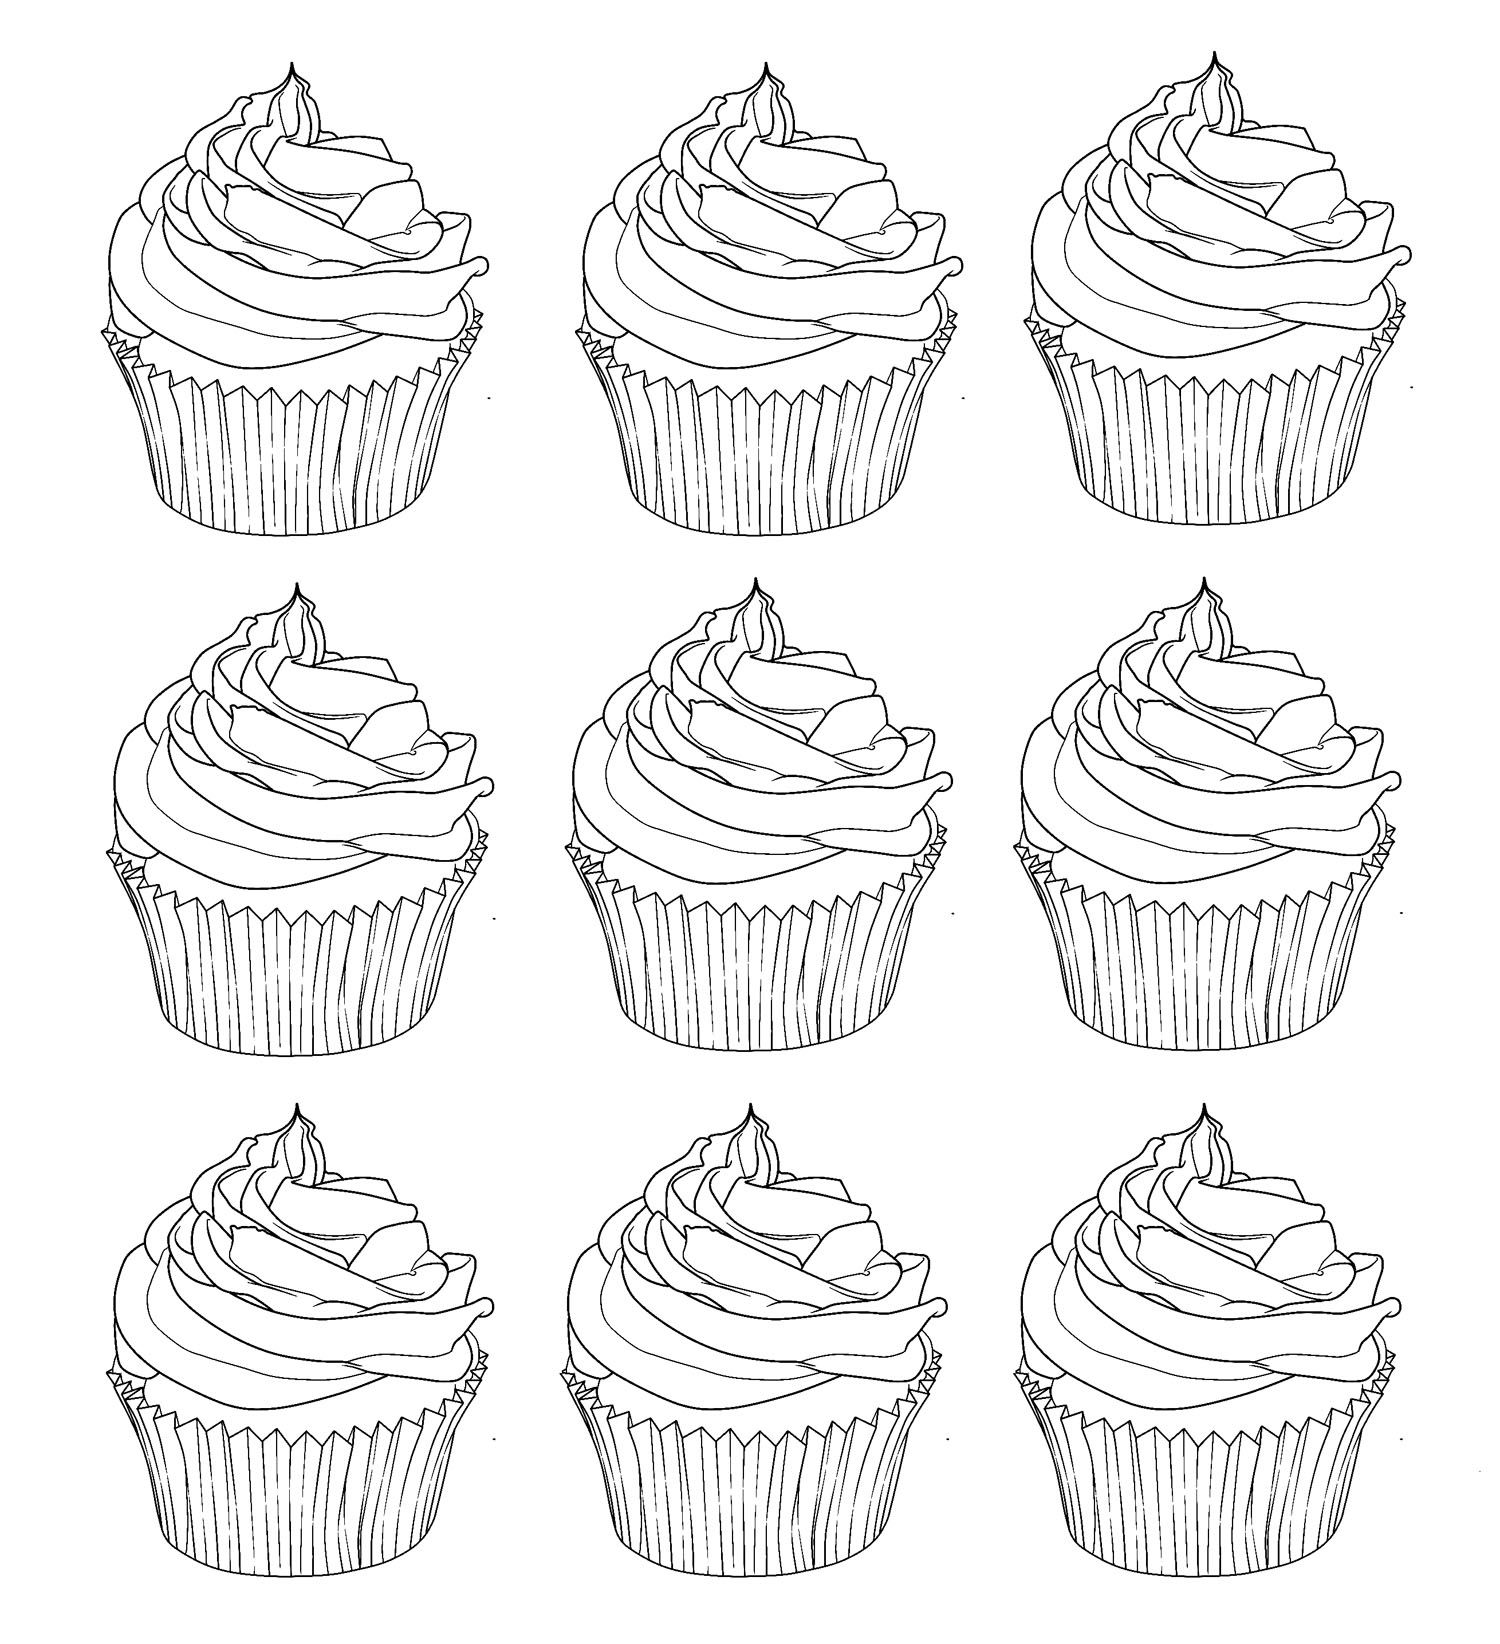 Cup Cake - Coloring Pages for adults : coloring-cupcakes-warhol